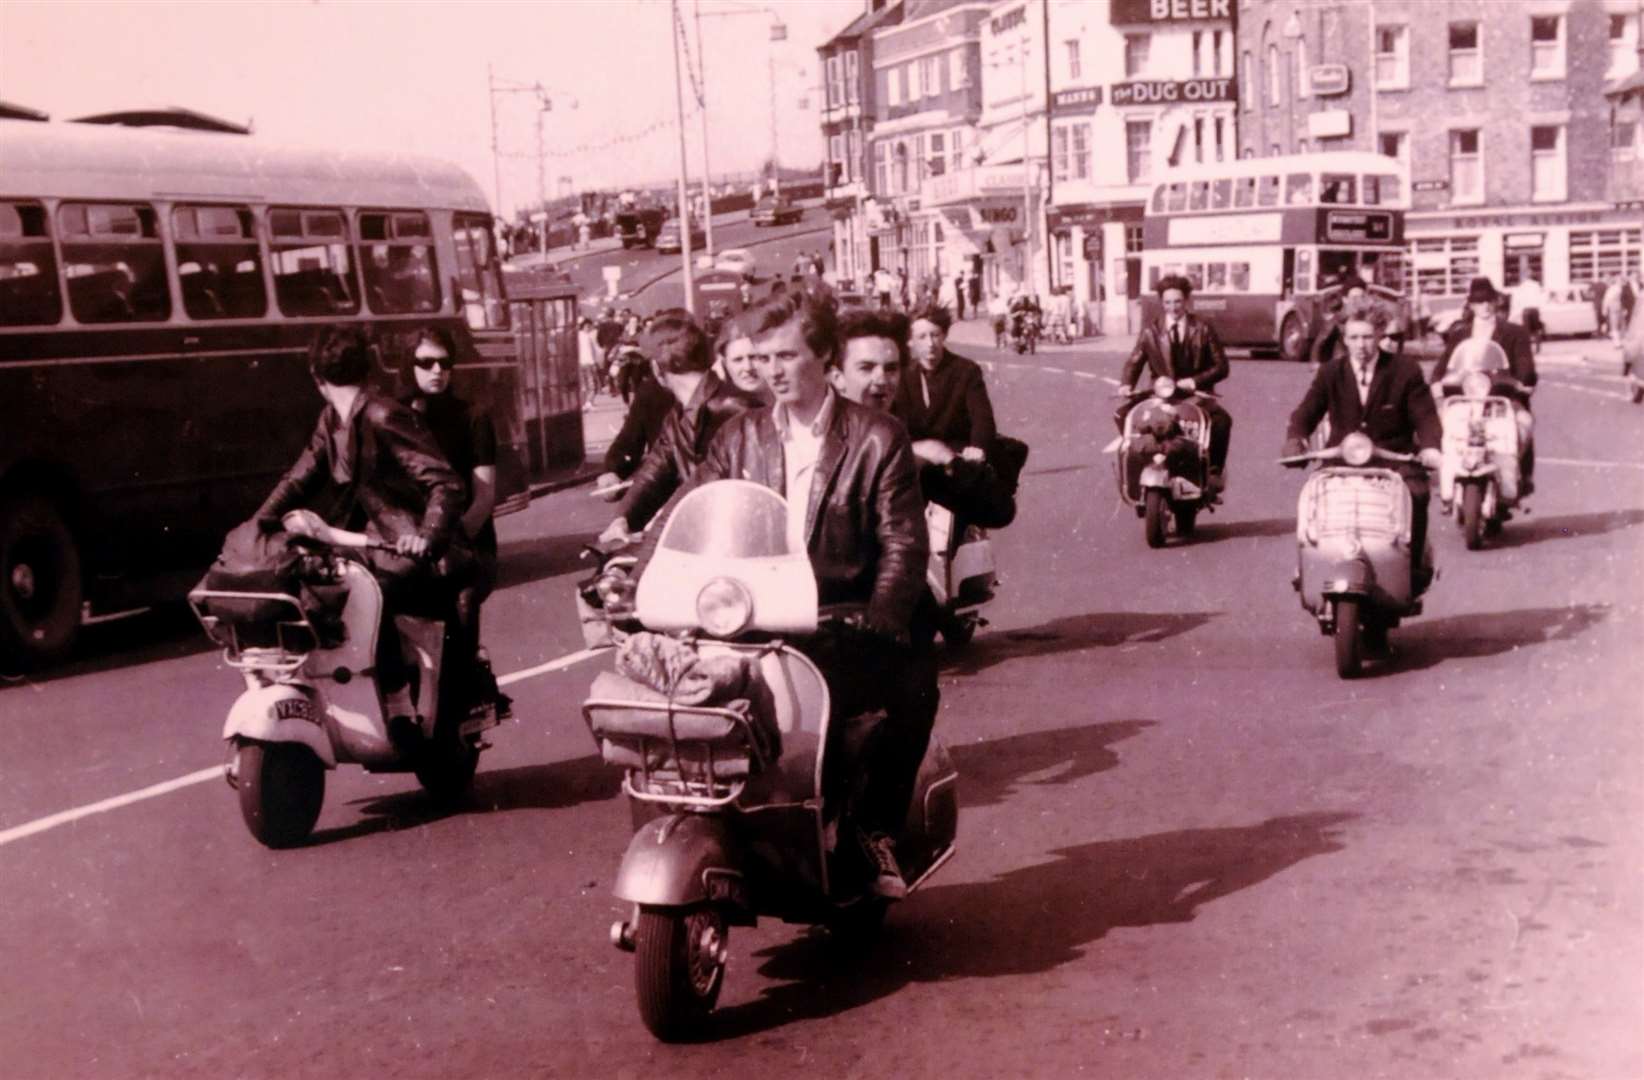 Image used at an exhibition in Margate 10 years ago to mark the Mods and Rockers disturbances of 1964